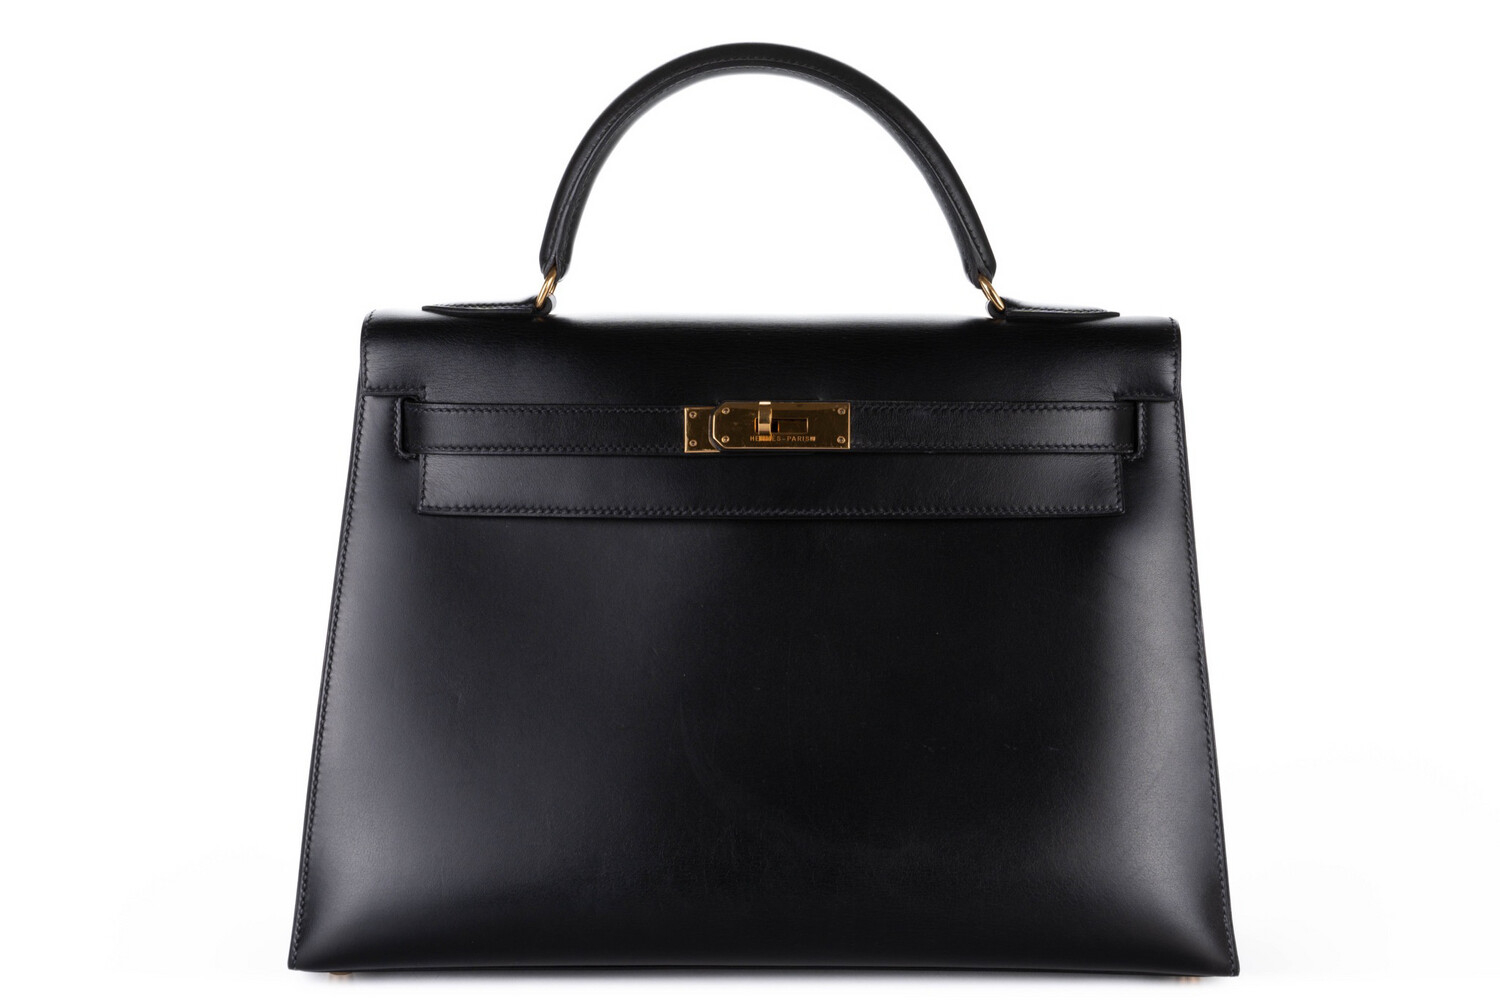 Hermes Kelly 32, Box Calf Leather, Gold Hardware, Preowned In Dustbag (Ships Duty Free From London) - Credit Card Payment